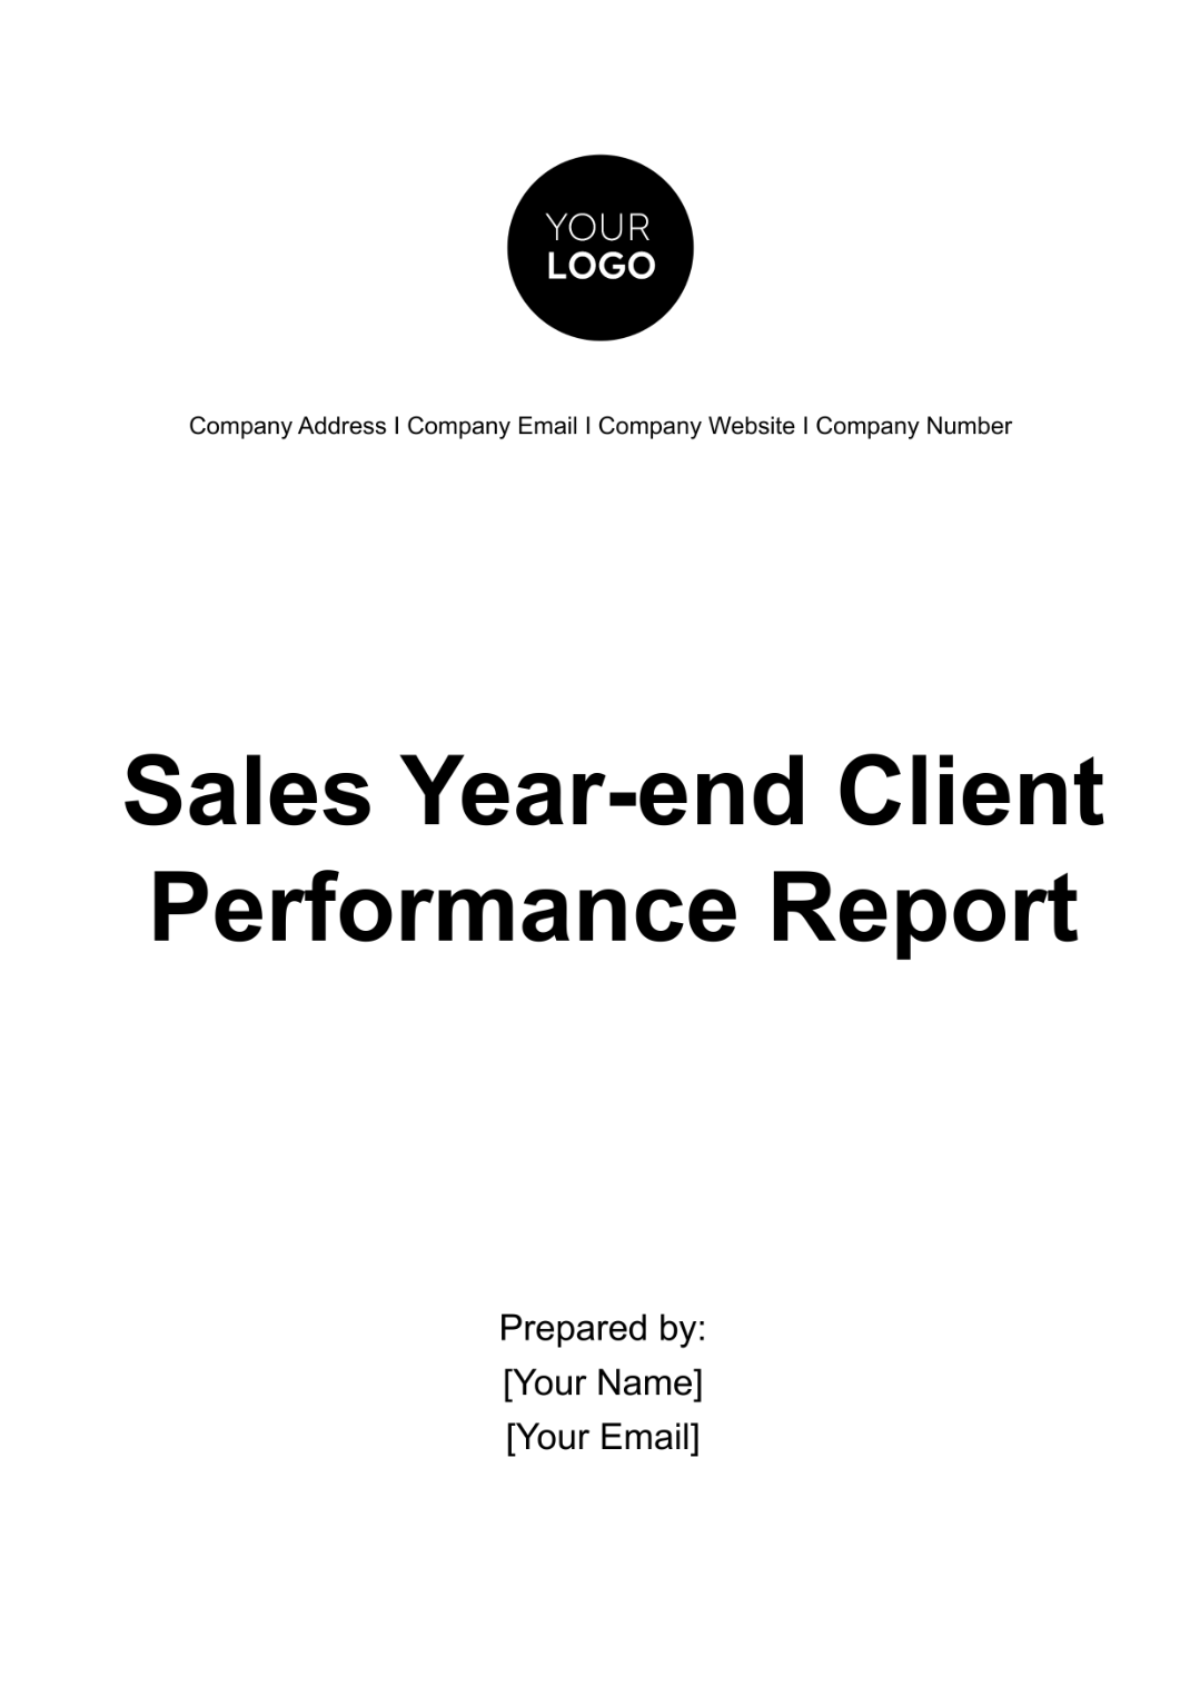 Sales Year-end Client Performance Report Template